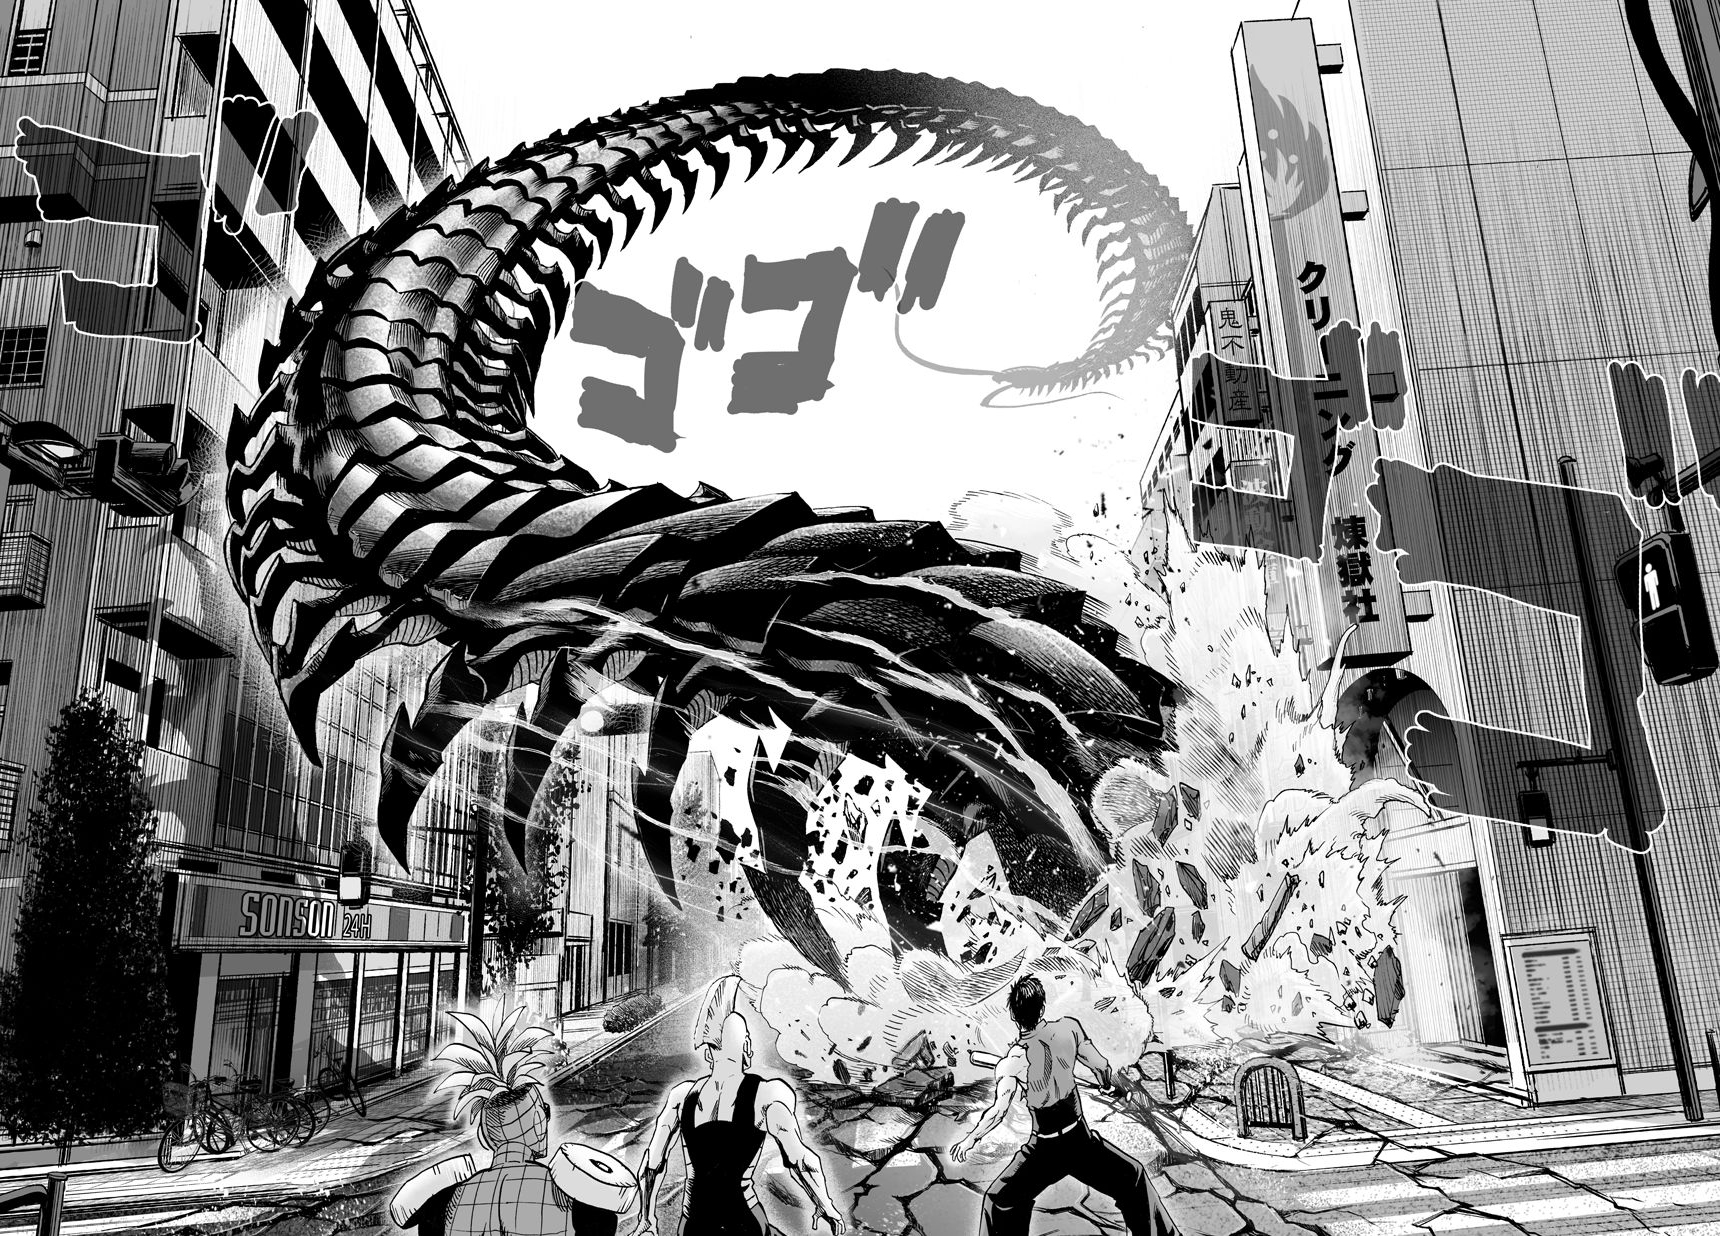 One Punch Man, Chapter 55 - Pumped Up image 16